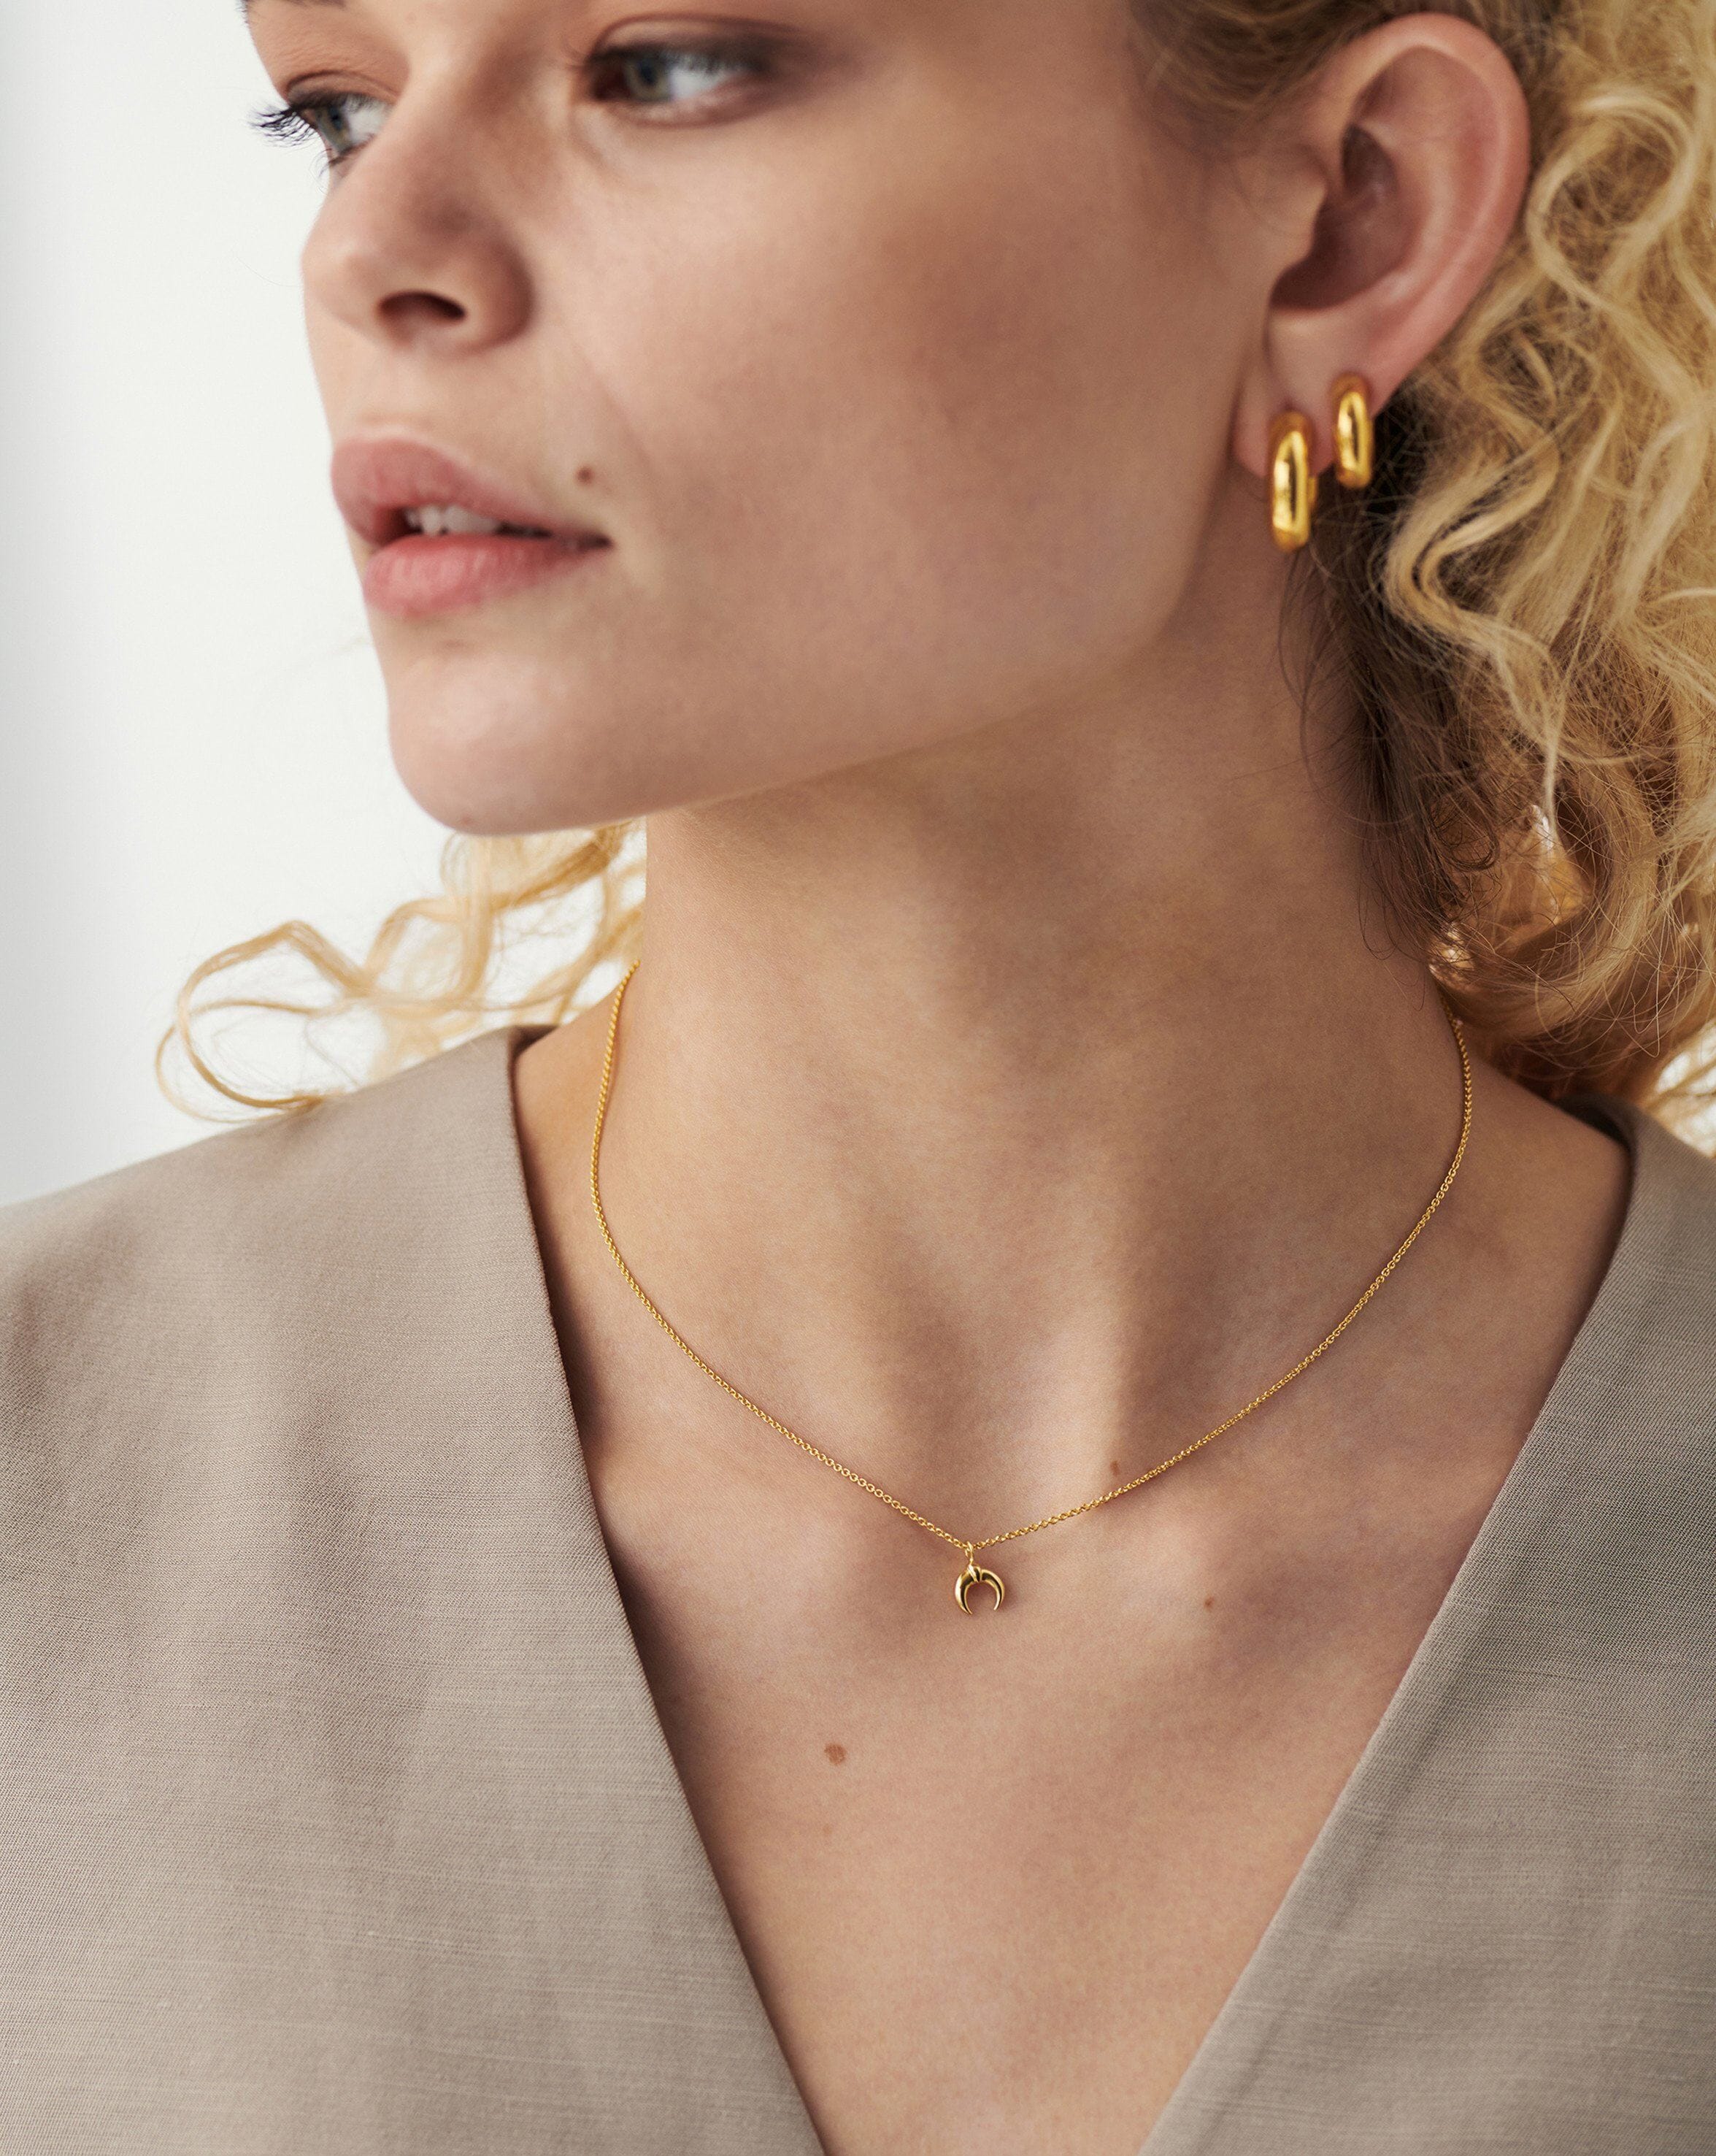 DSJ's Signature Meaningful Gold MIMI Necklace | Initial Necklace